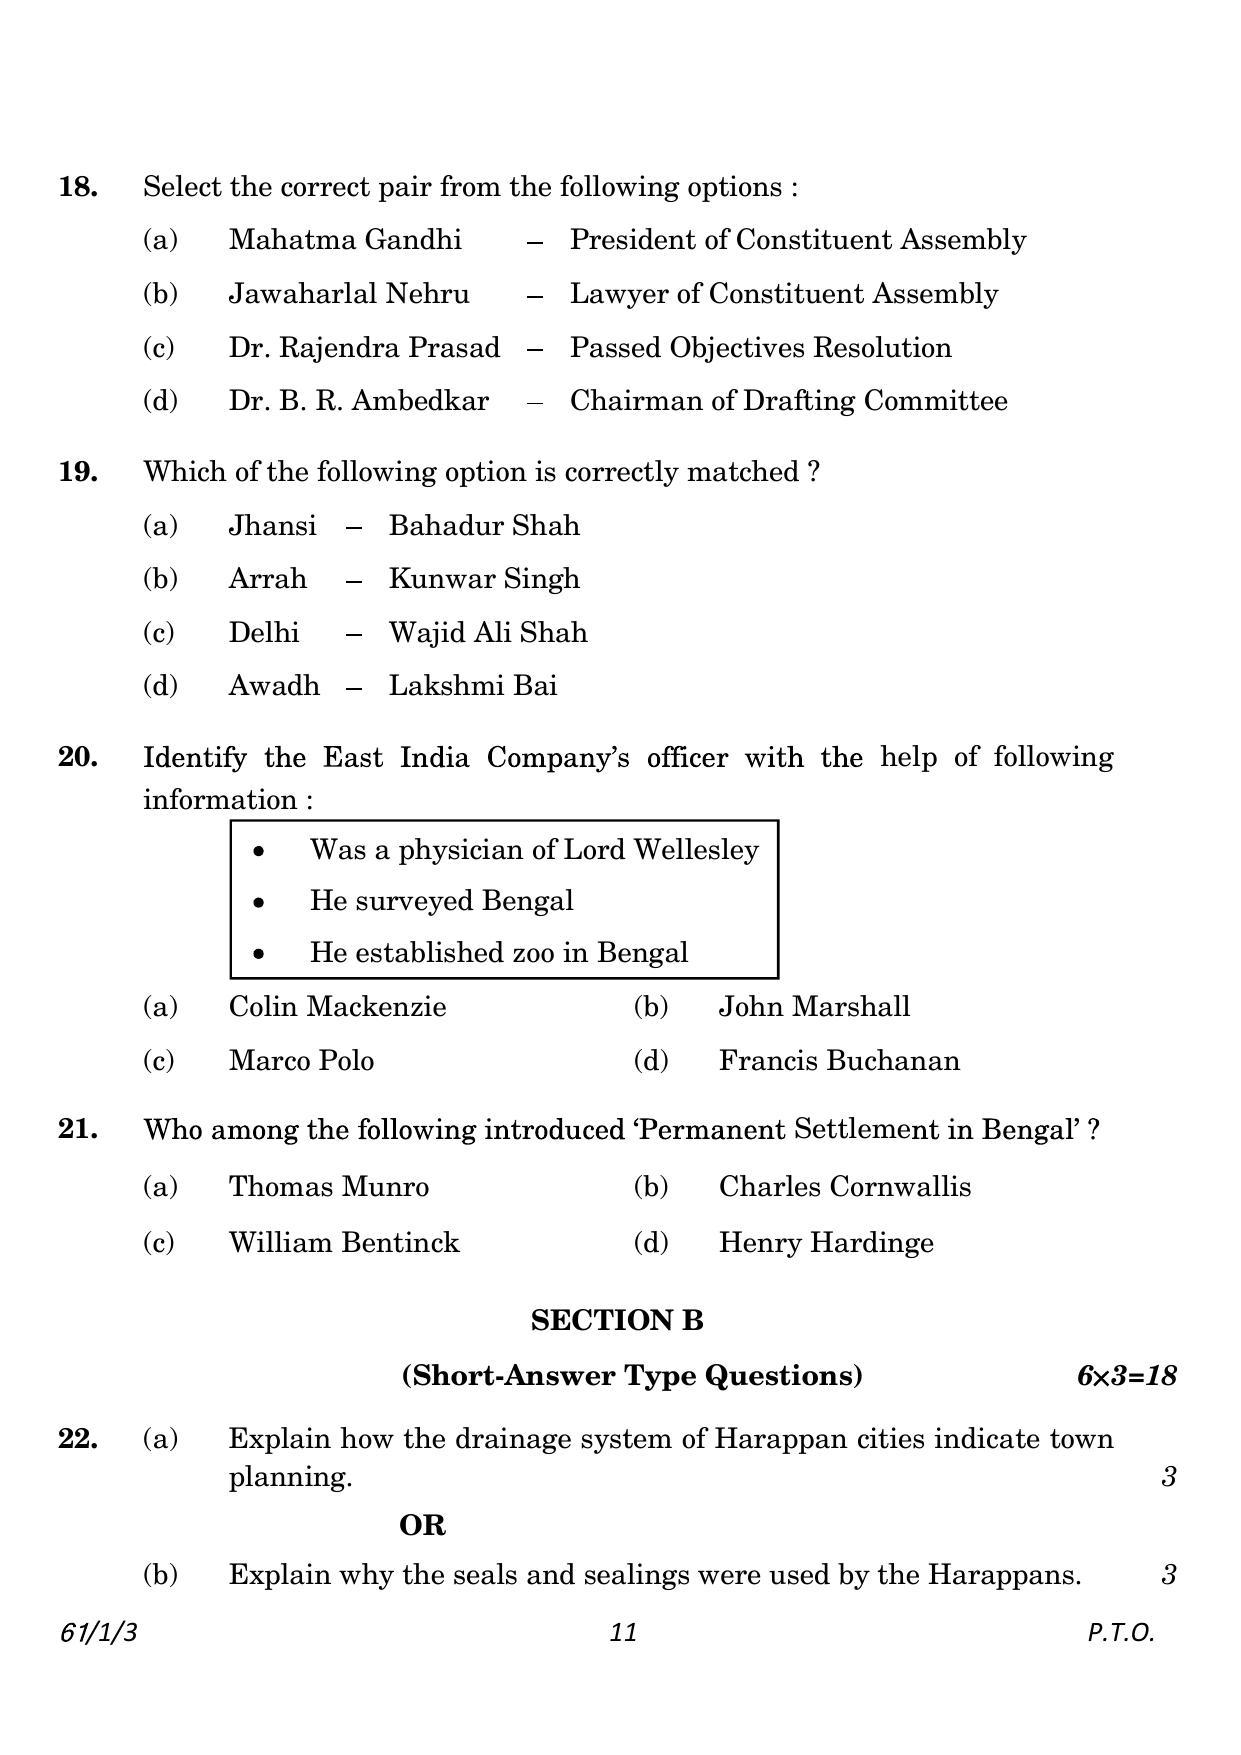 CBSE Class 12 61-1-3 History 2023 Question Paper - Page 11